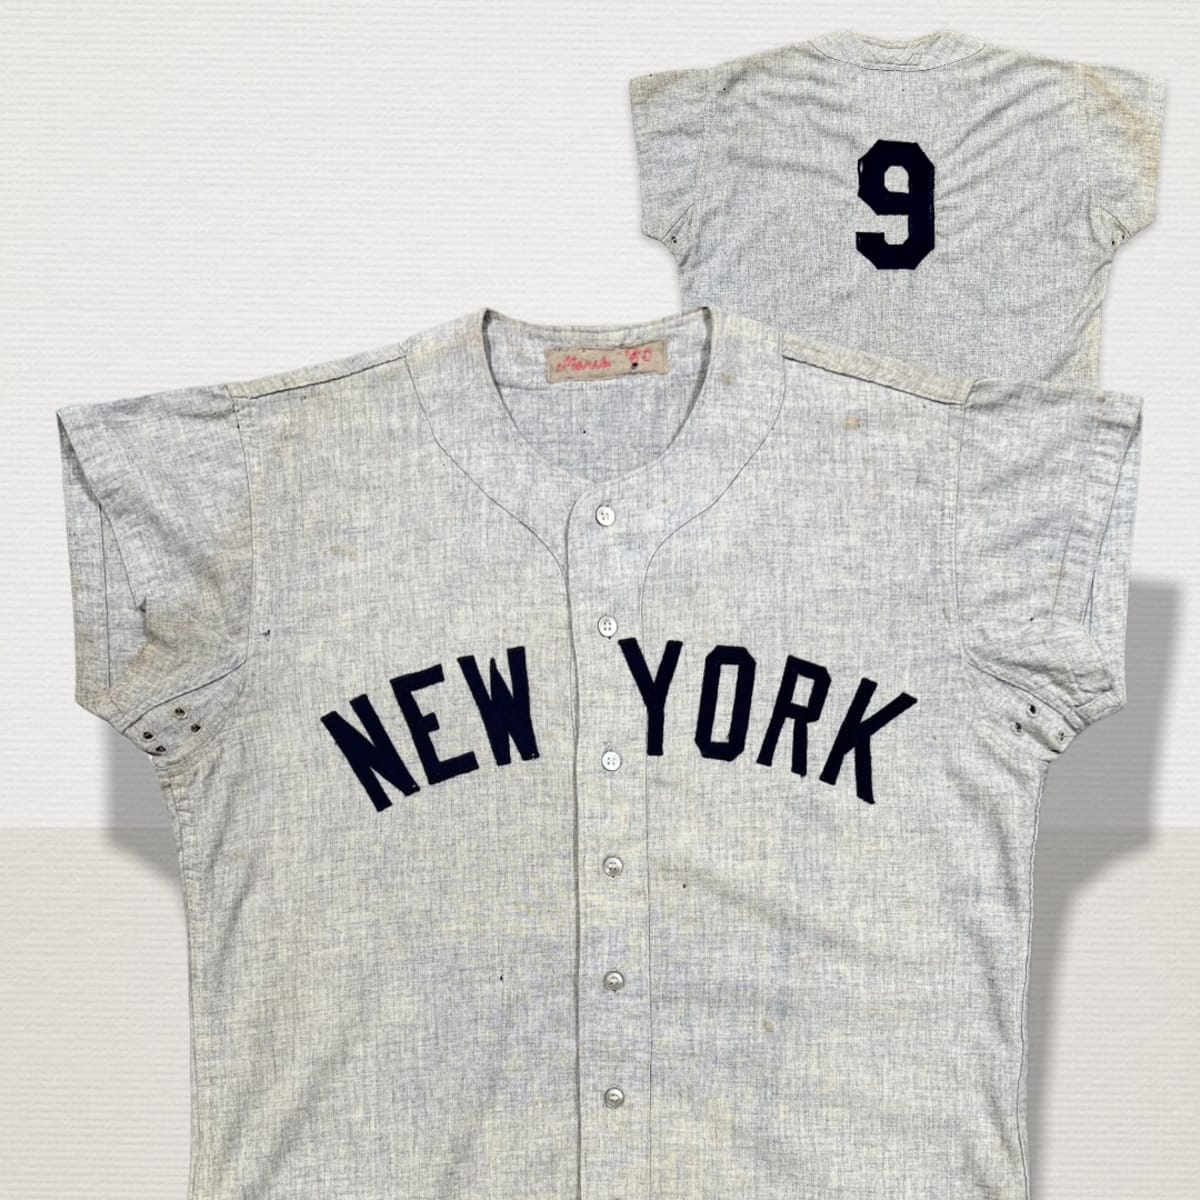 New York Yankees #9 Roger Maris 1961 White Throwback Jersey on sale,for  Cheap,wholesale from China